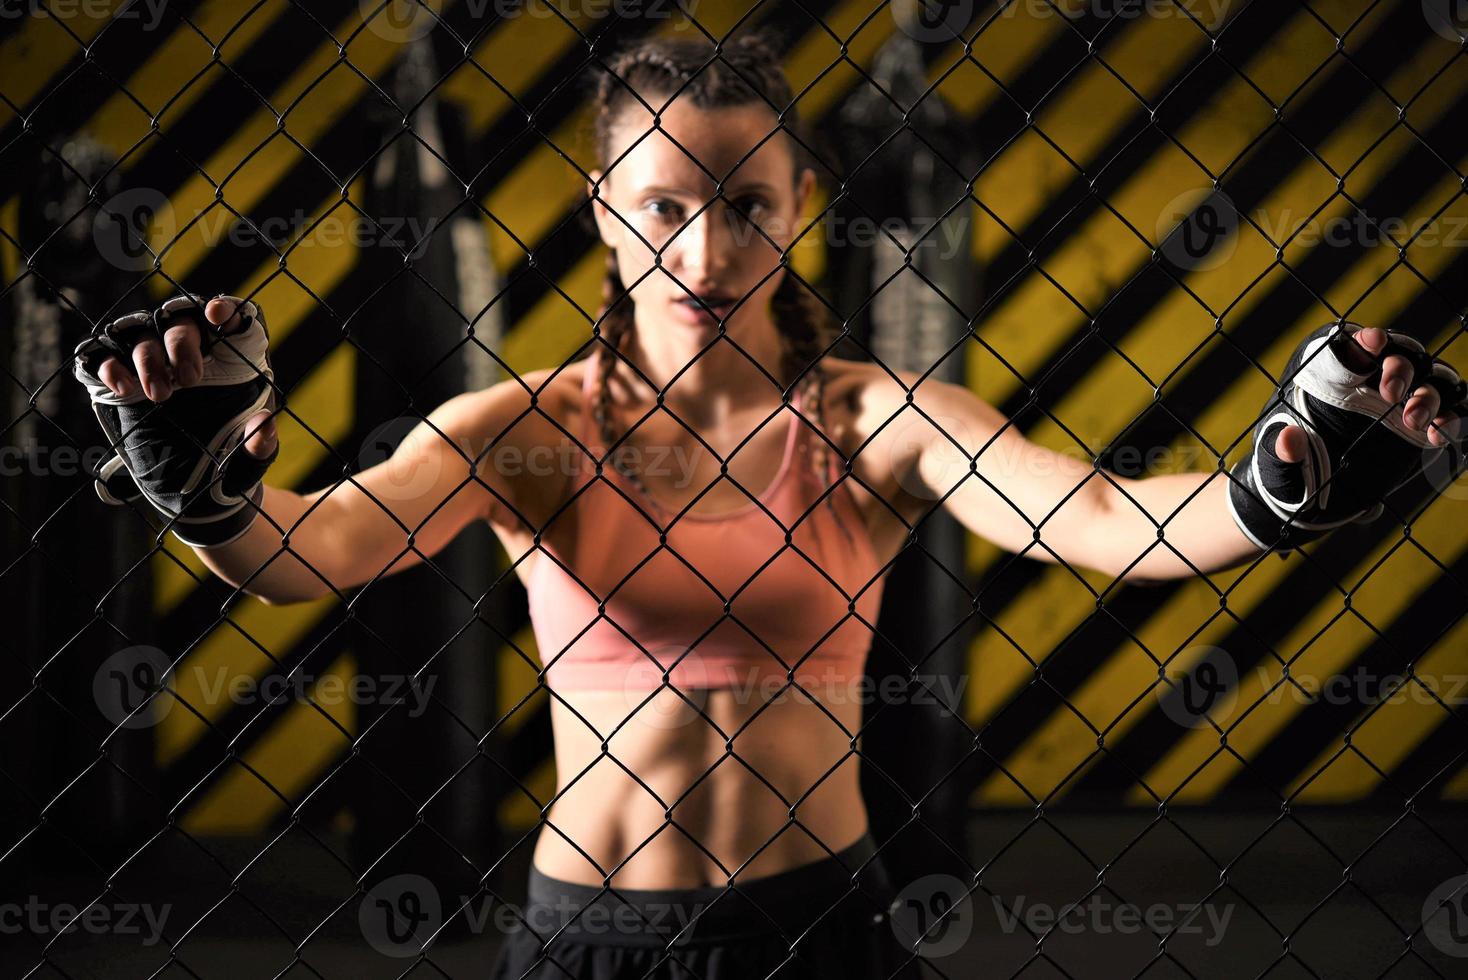 A female trainee of mixed martial arts wearing a hand wrap warms up within the ring cage by stretching her back and legs. photo